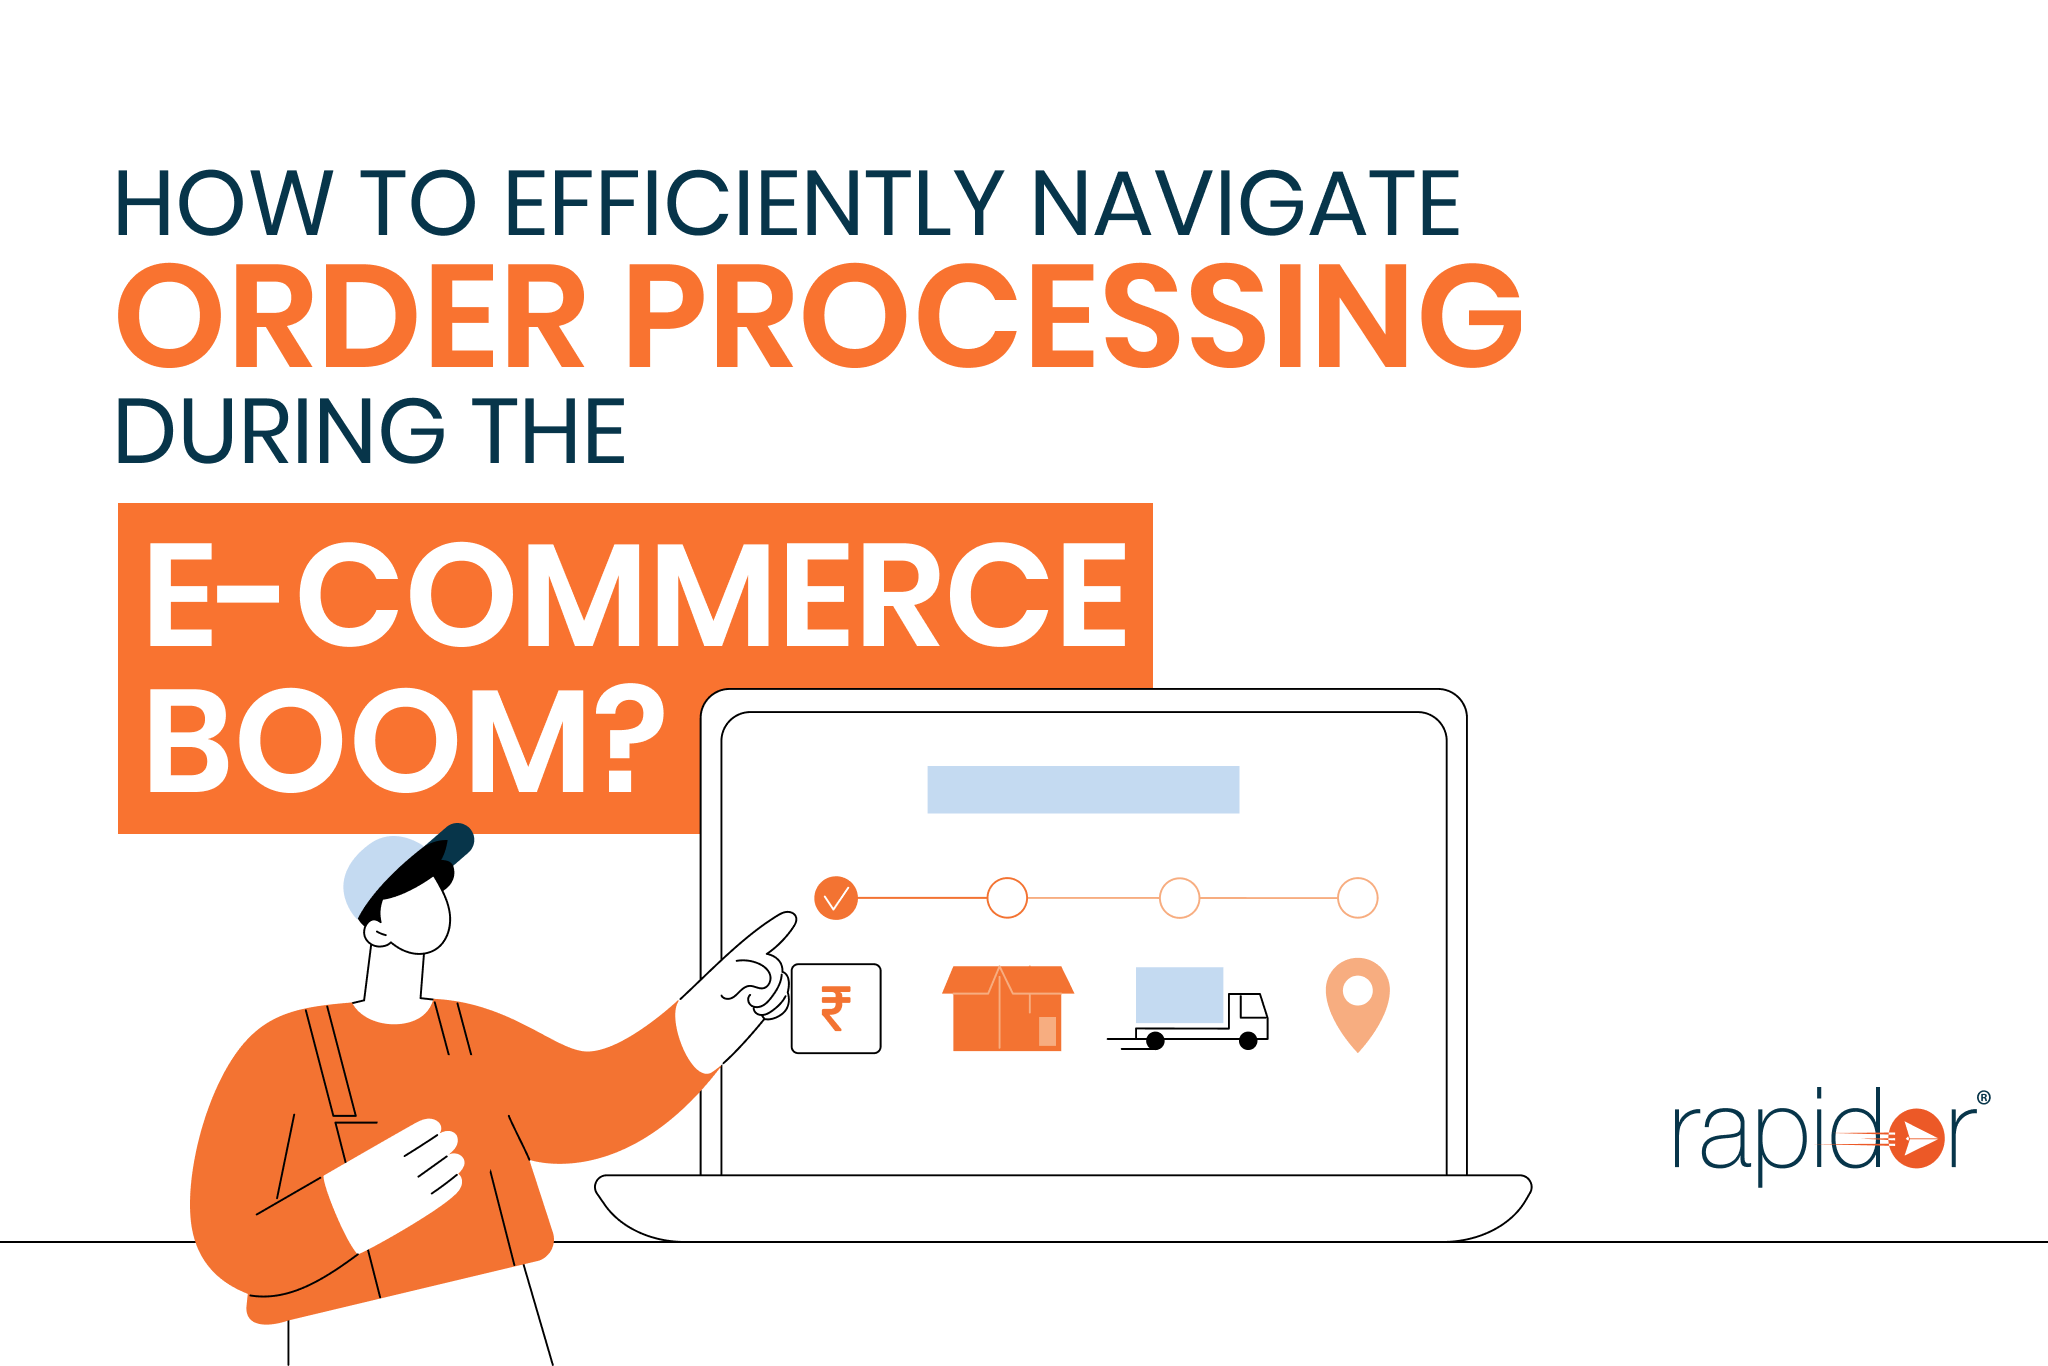 Order Processing for E-Commerce